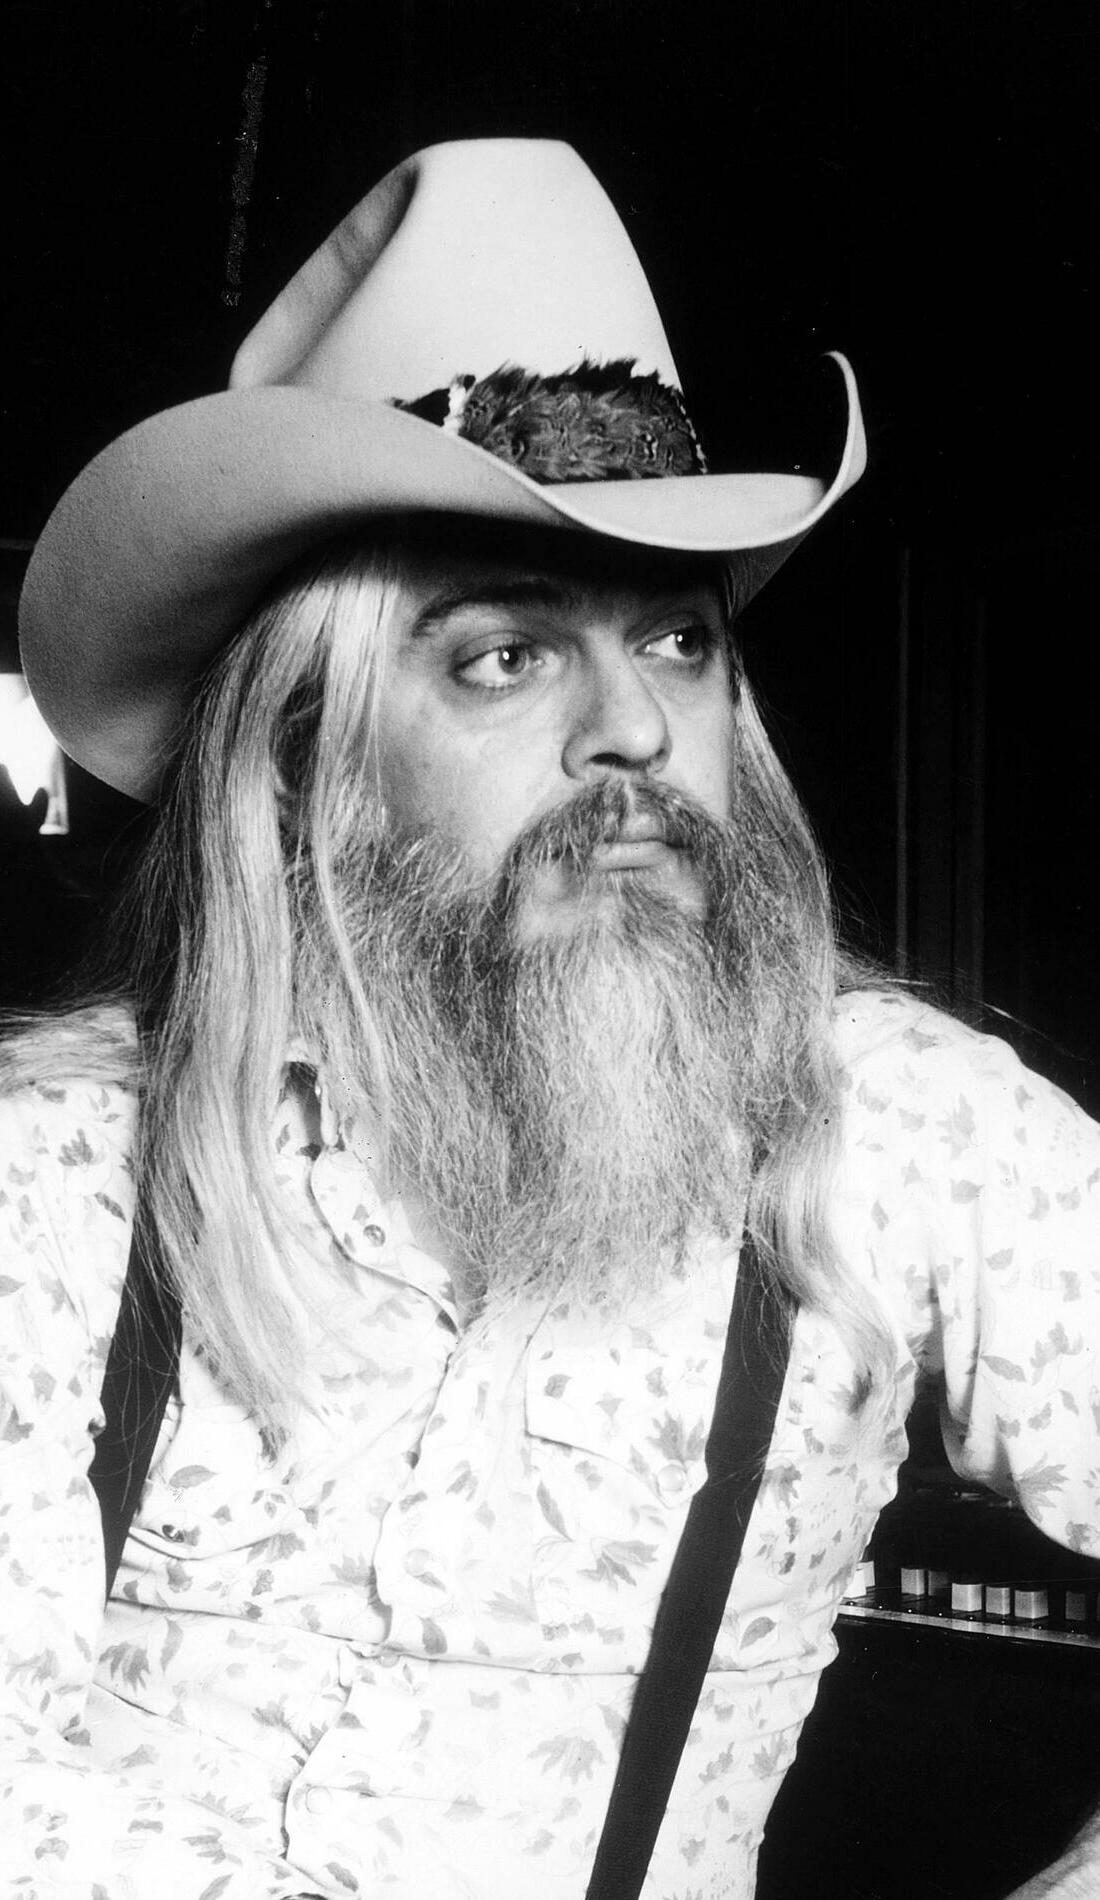 A LEON RUSSELL live event